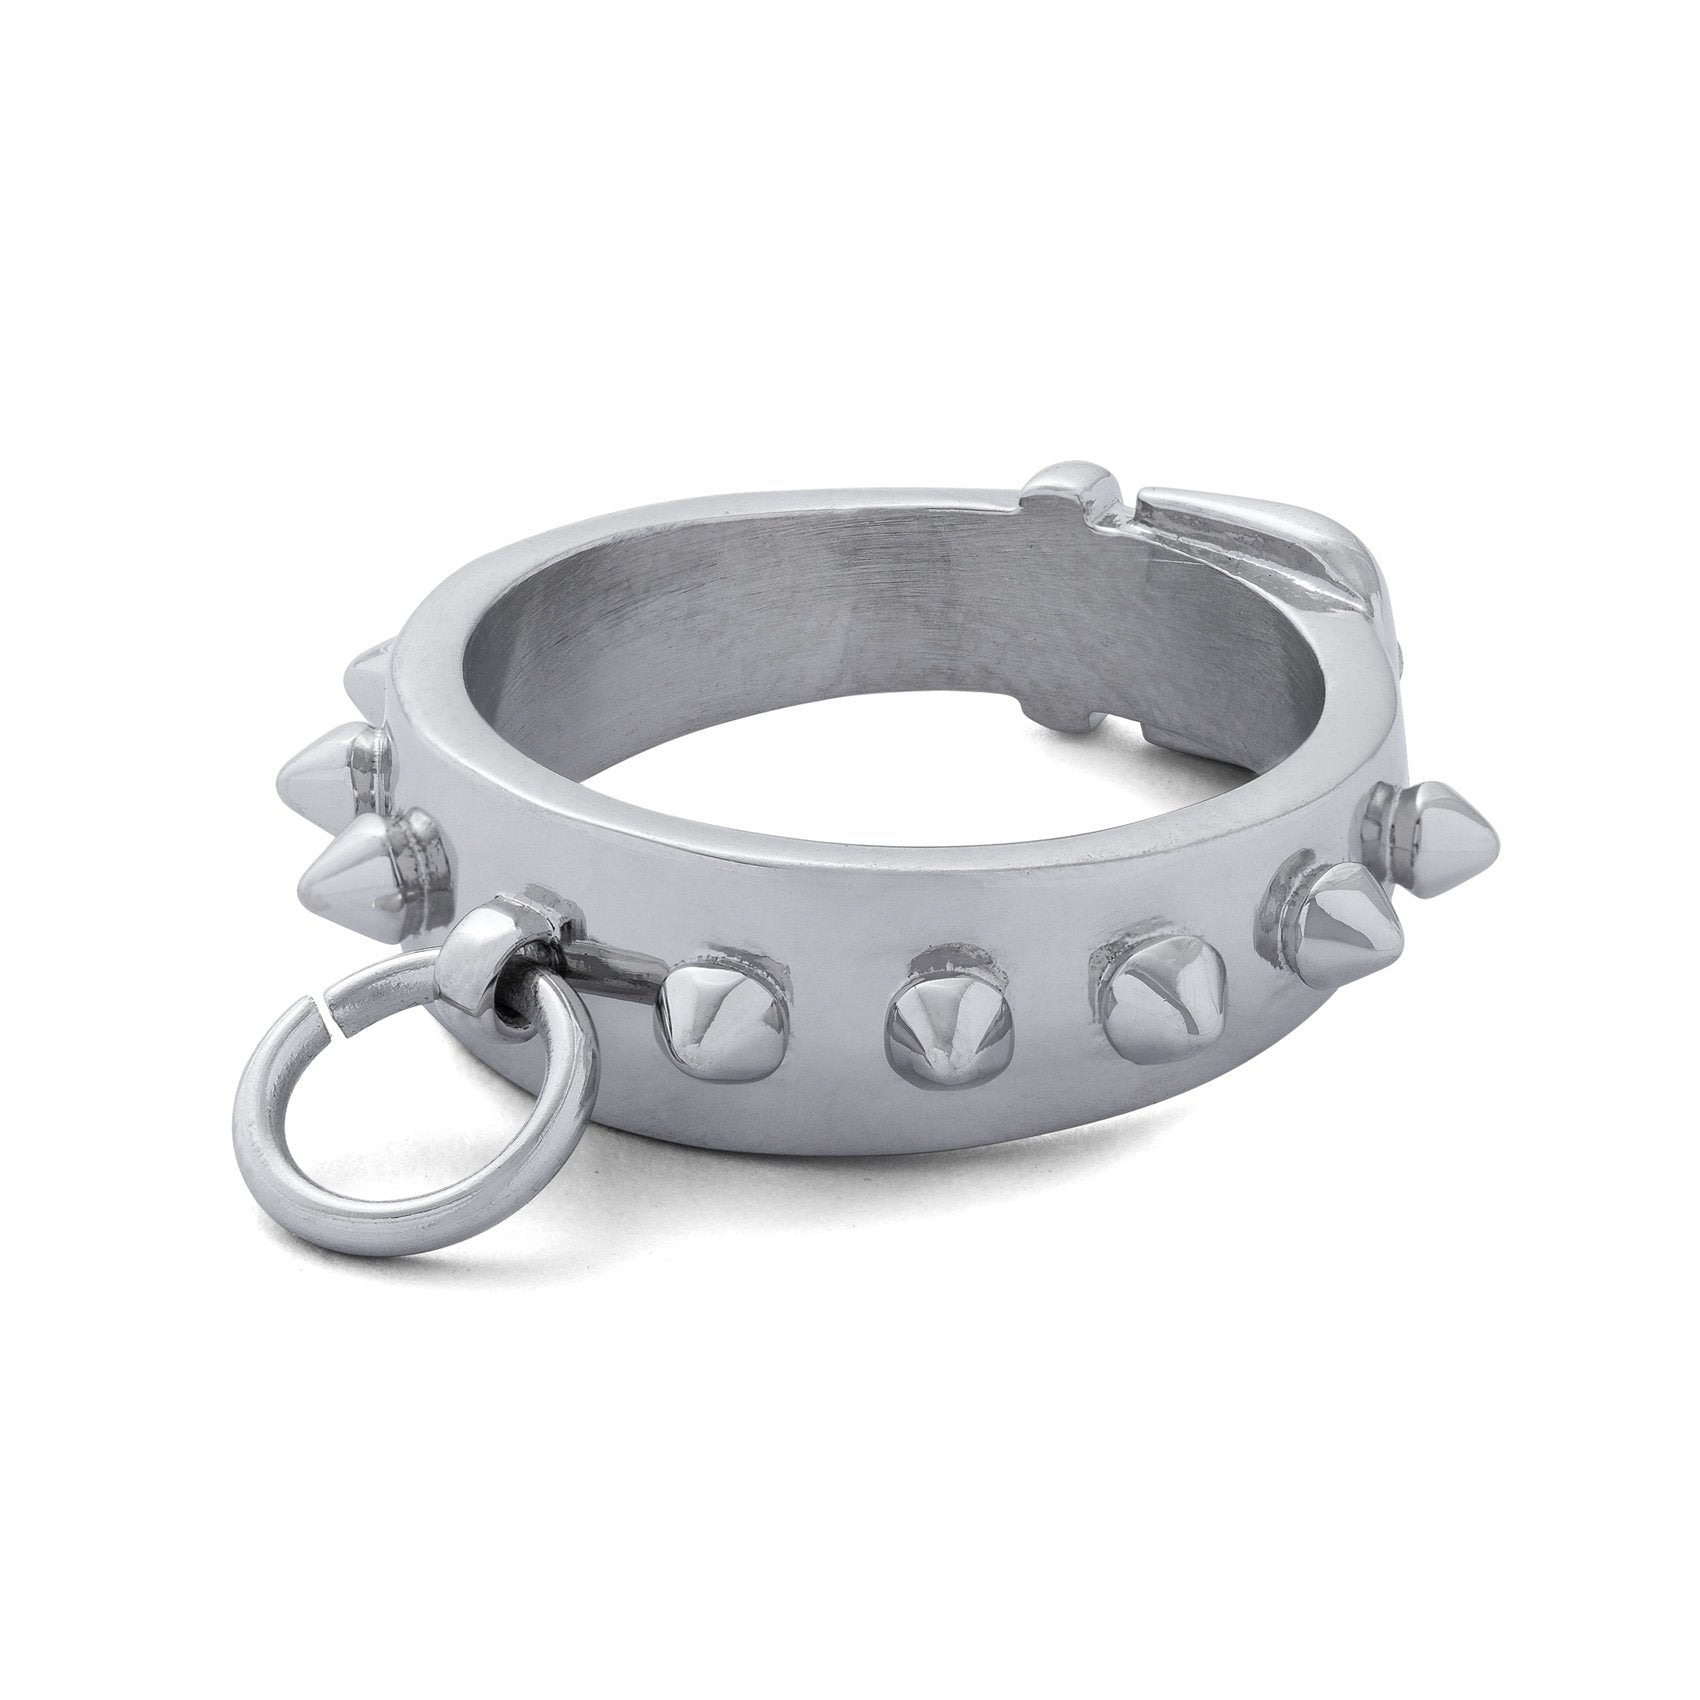 Spiked Dog Collar Ring Accessories STATEMENT 